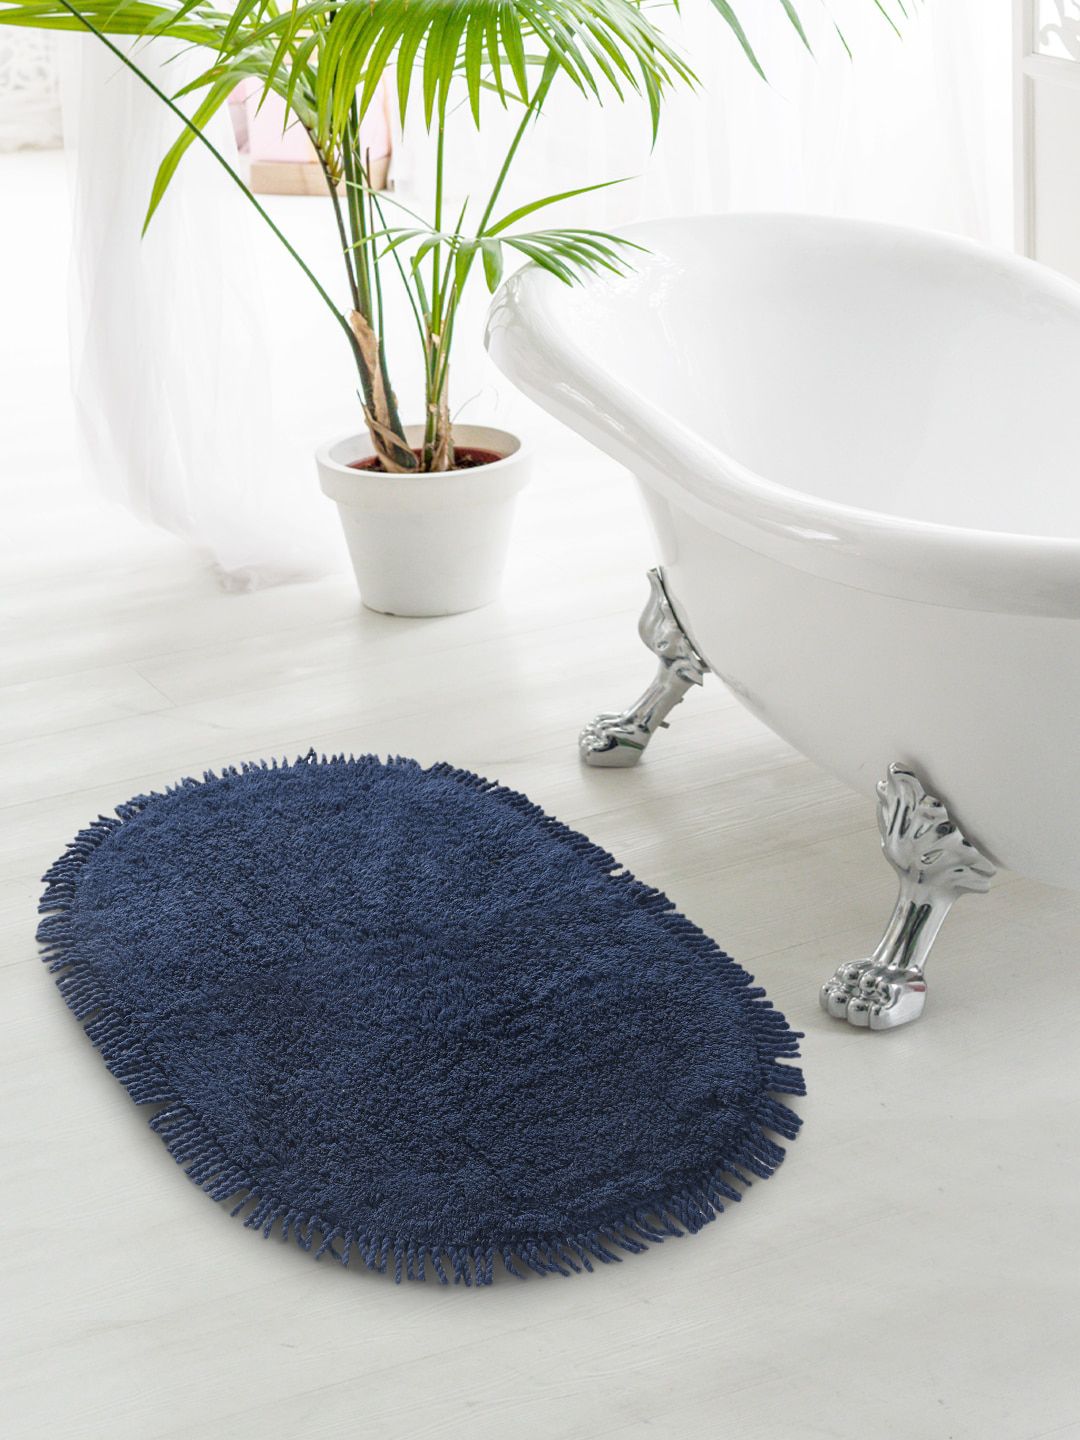 Saral Home Blue Solid Anti Skid Cotton Bath Rugs Price in India